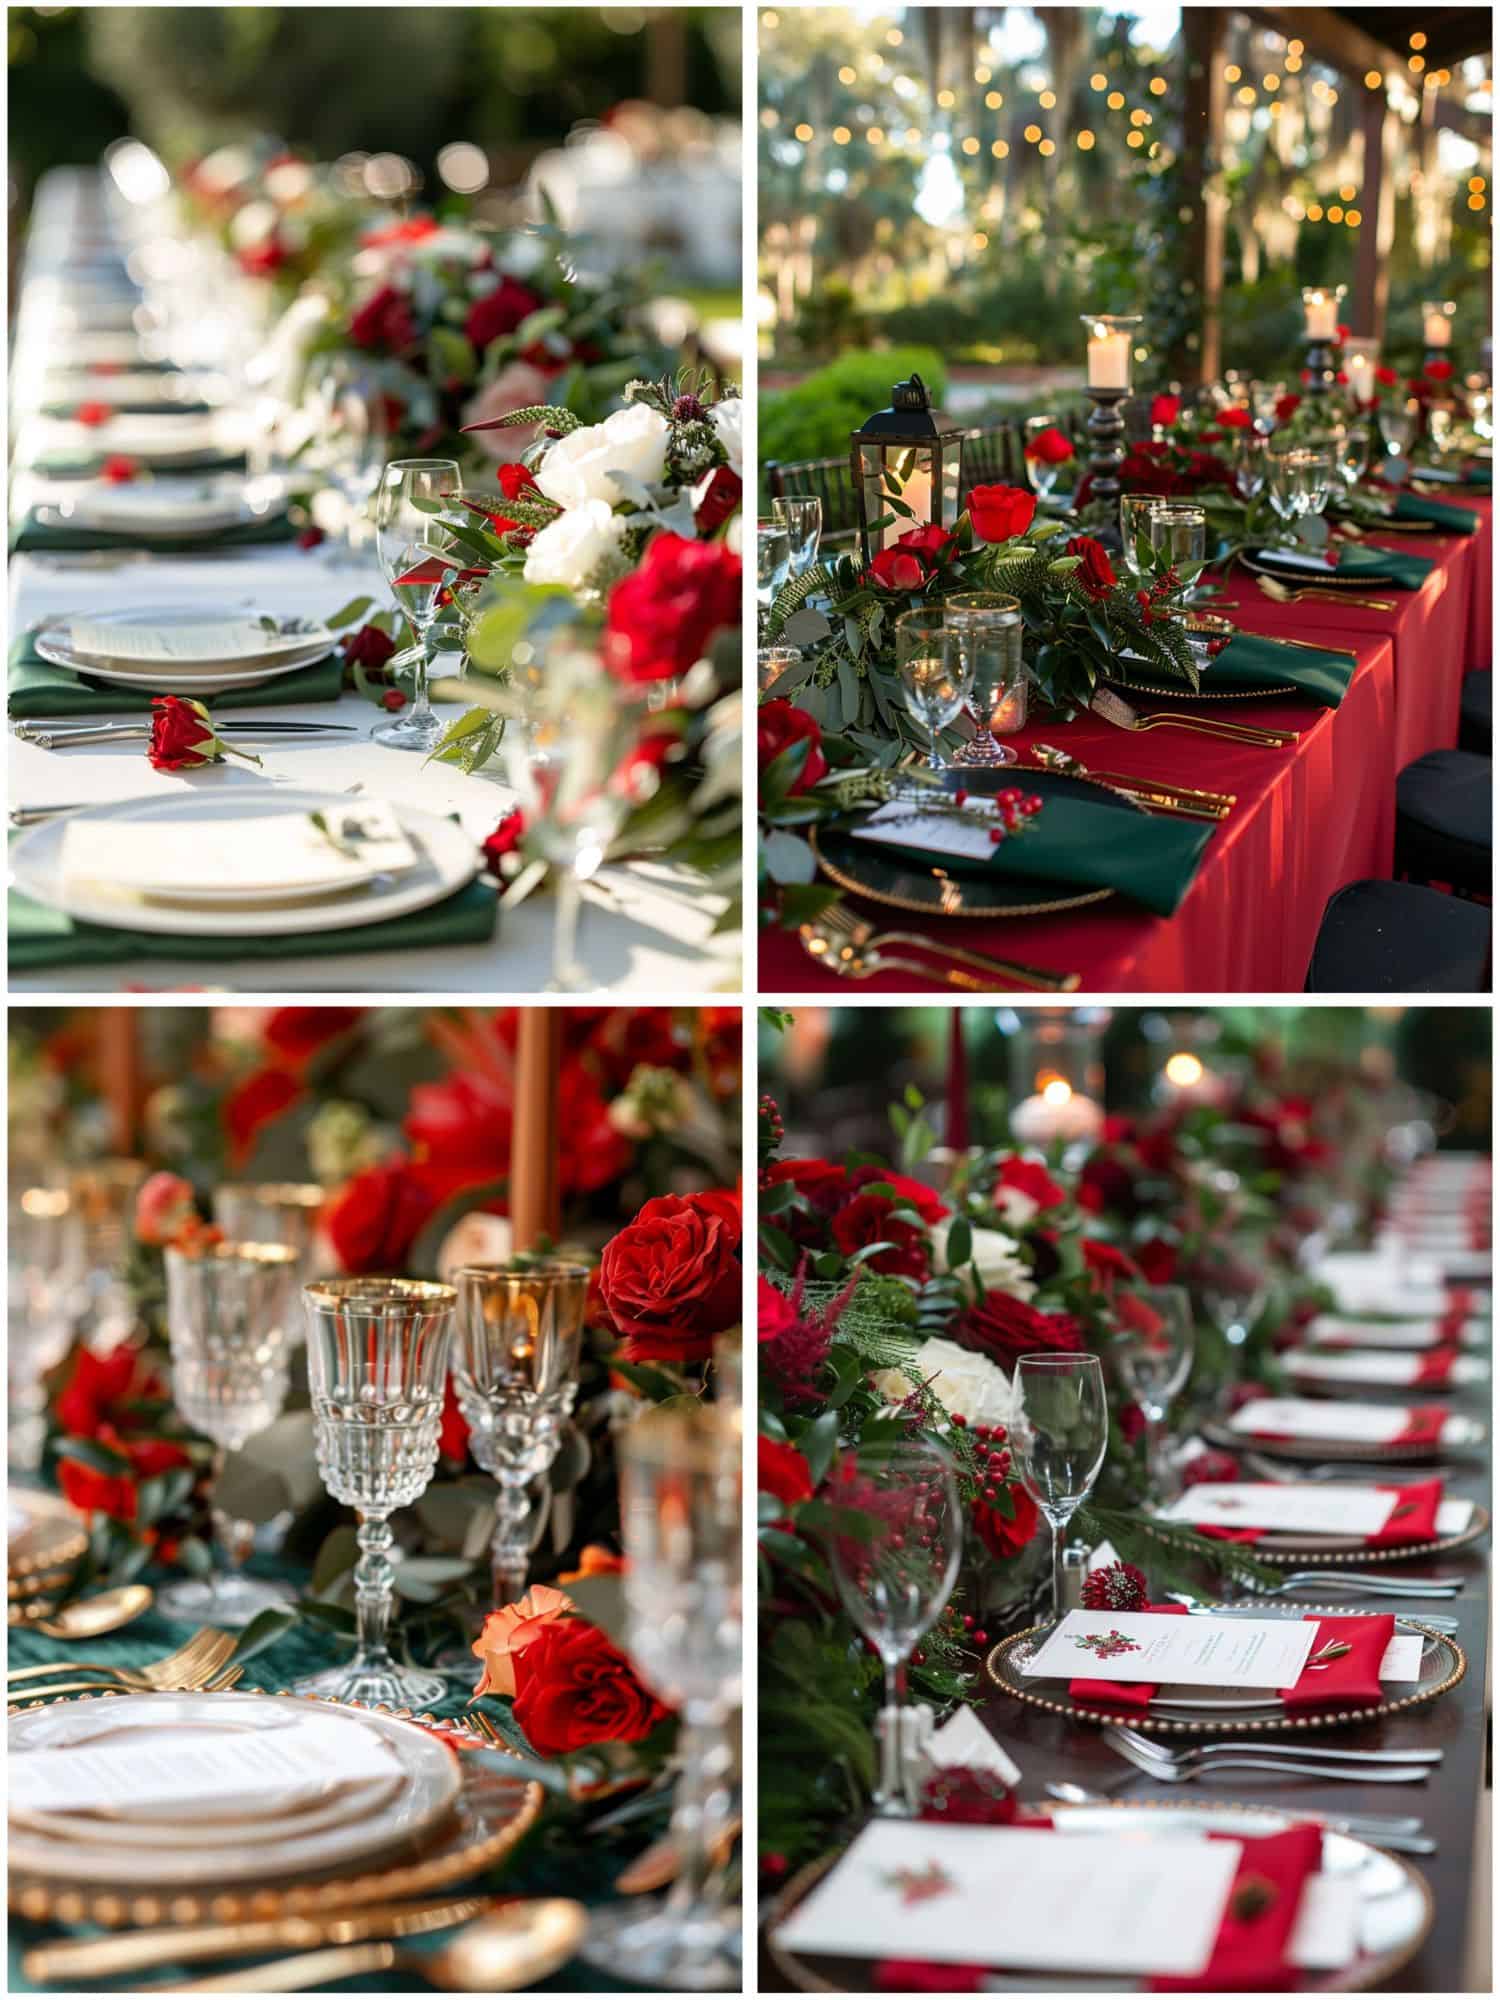 red and green-themed reception tablescapes